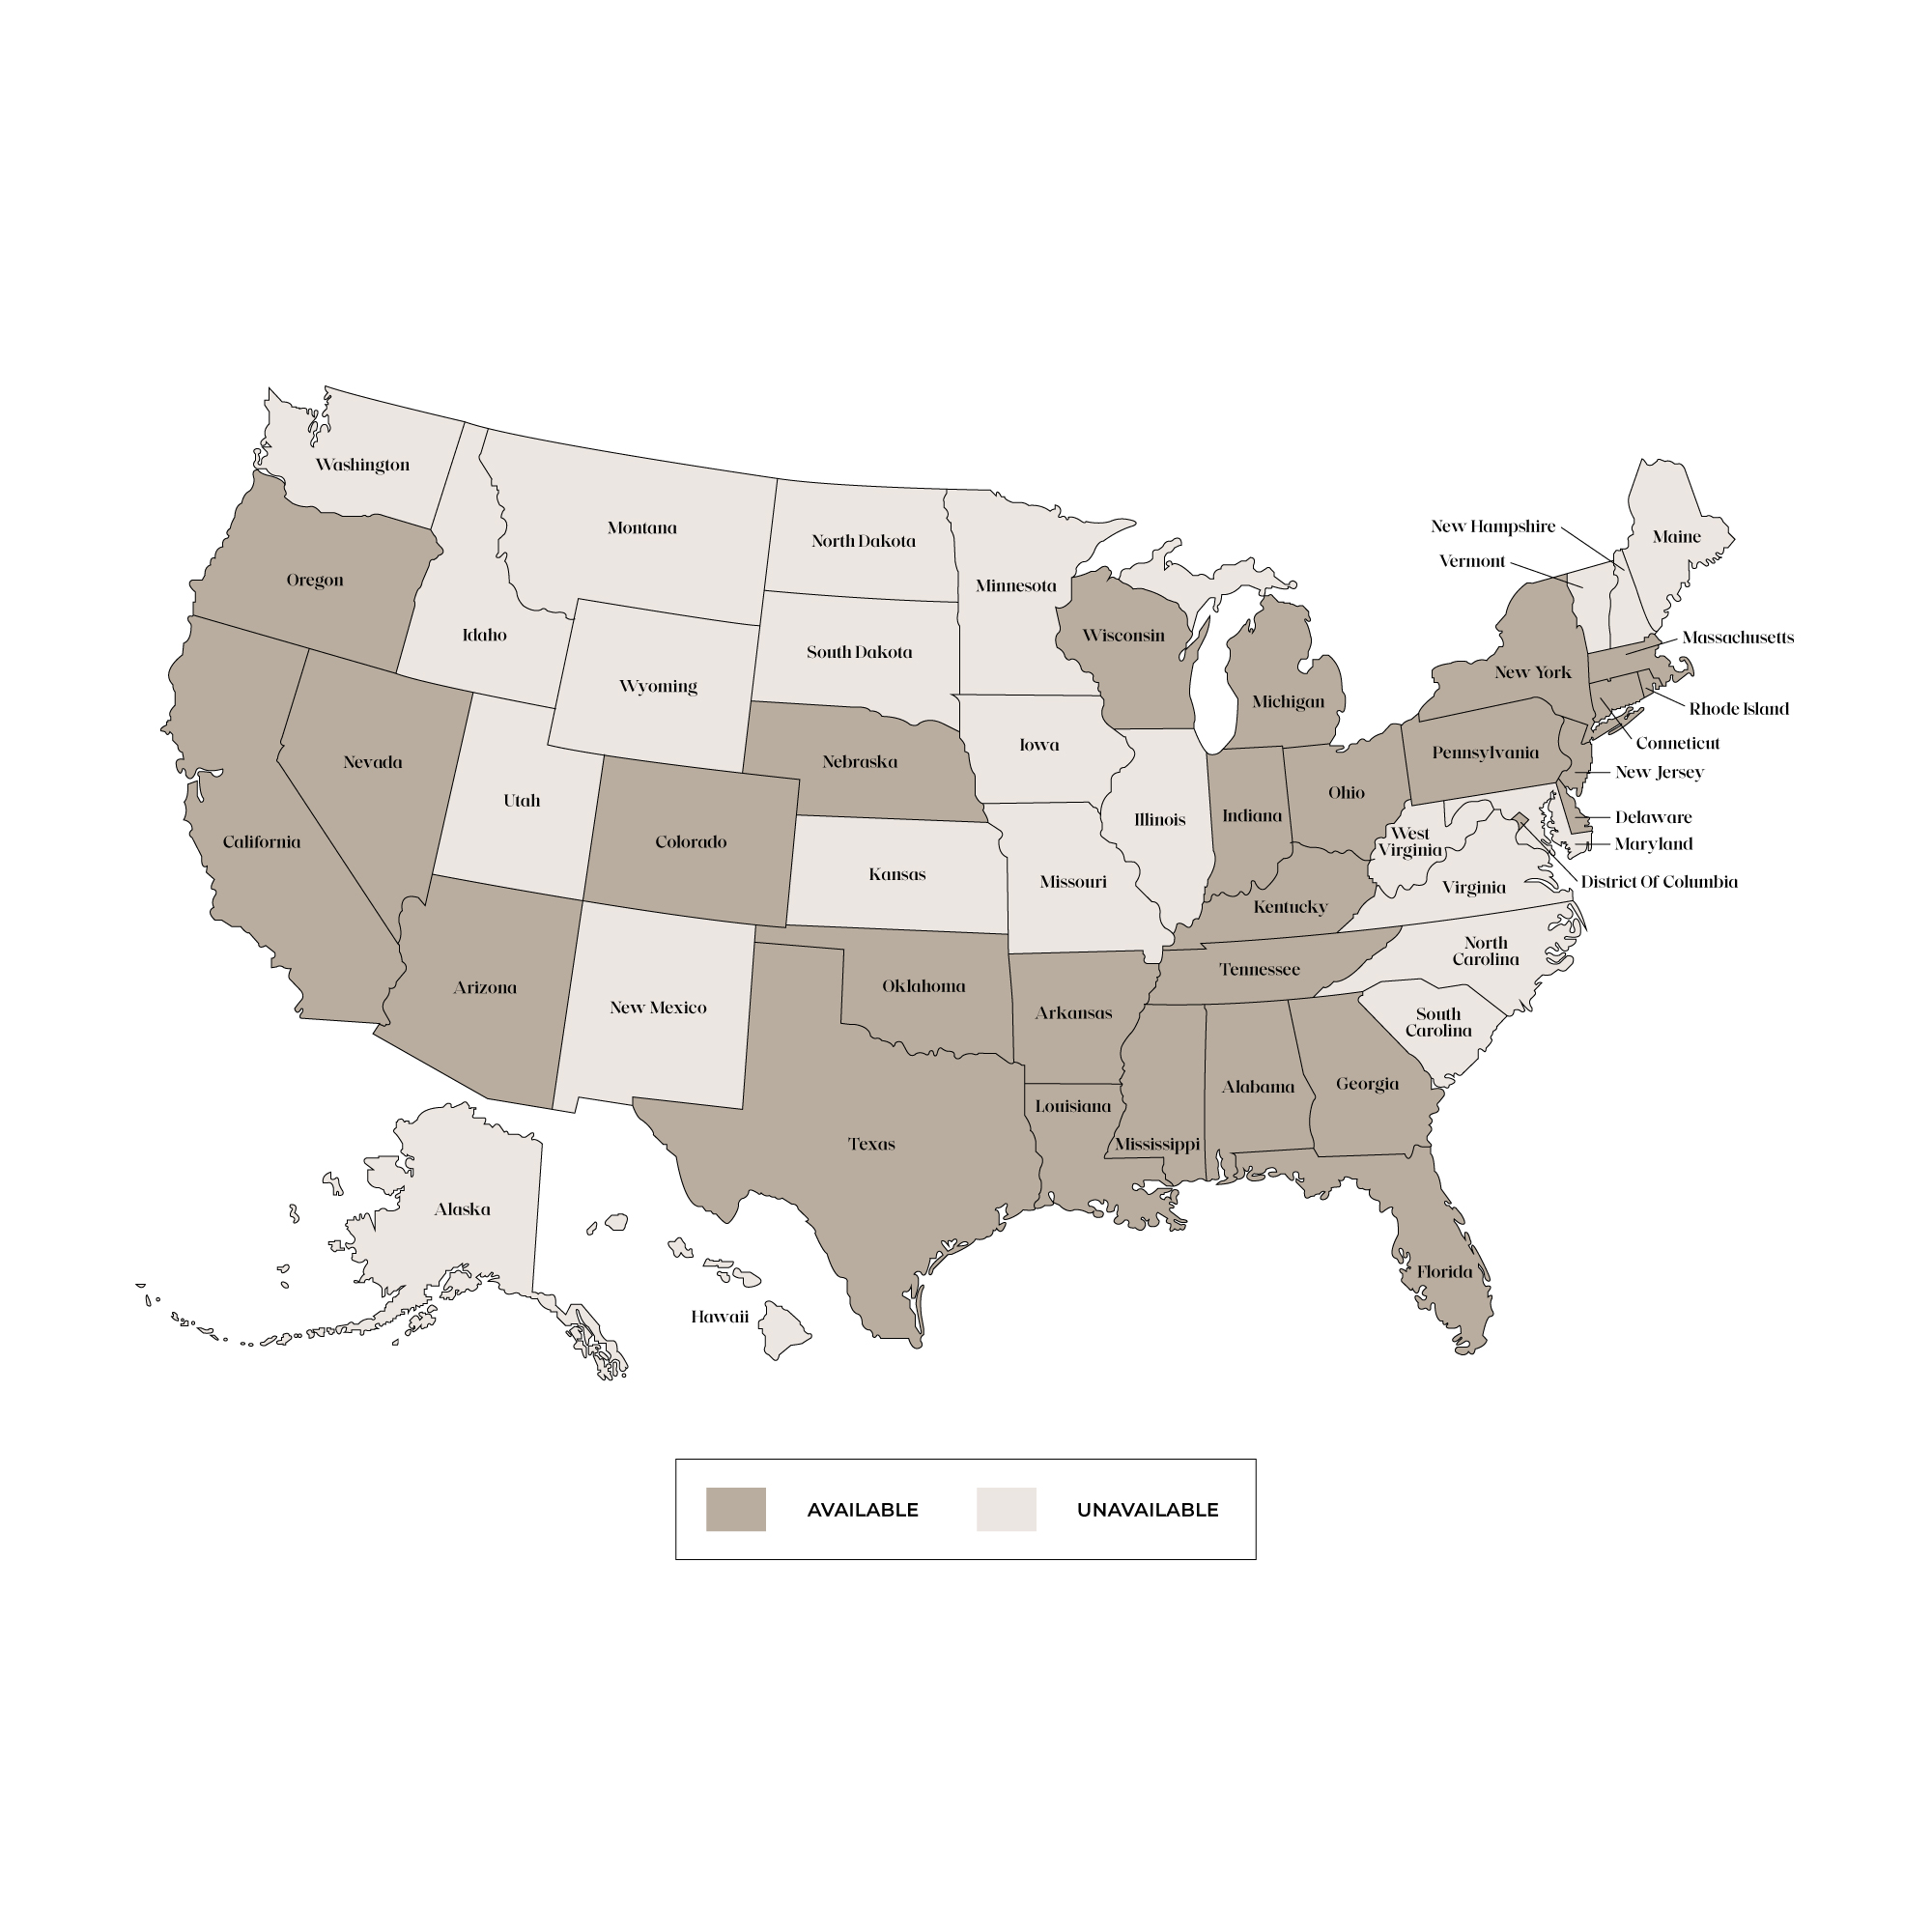 United States map of available and unavailable states for a franchise location